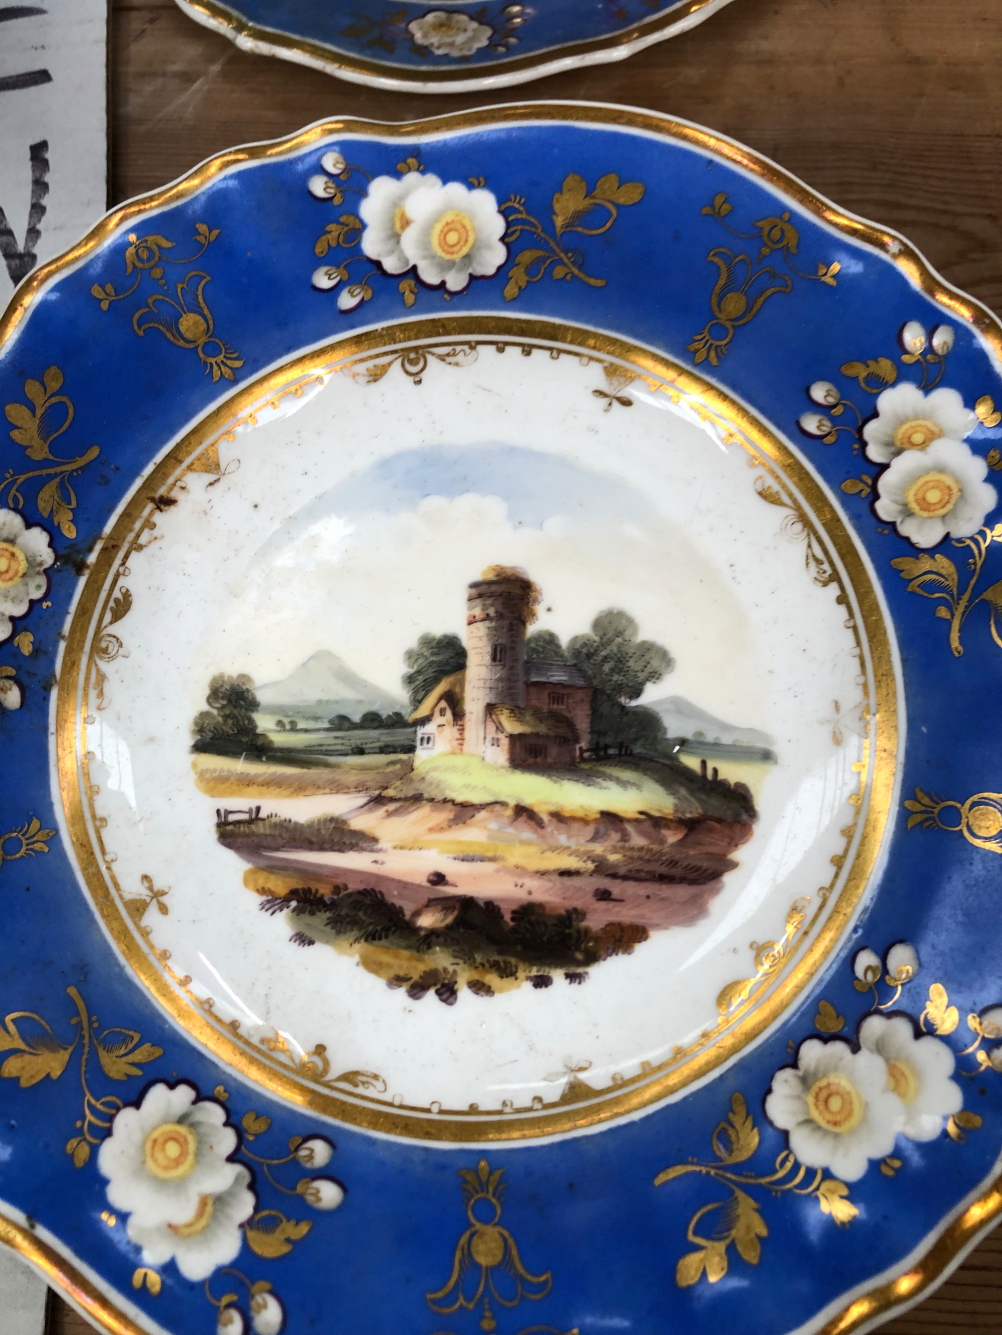 A 19th C. ENGLISH PORCELAIN DESSERT SERVICE PAINTED WITH LANDSCAPES WITHIN GILT BLUE BANDS - Image 11 of 27